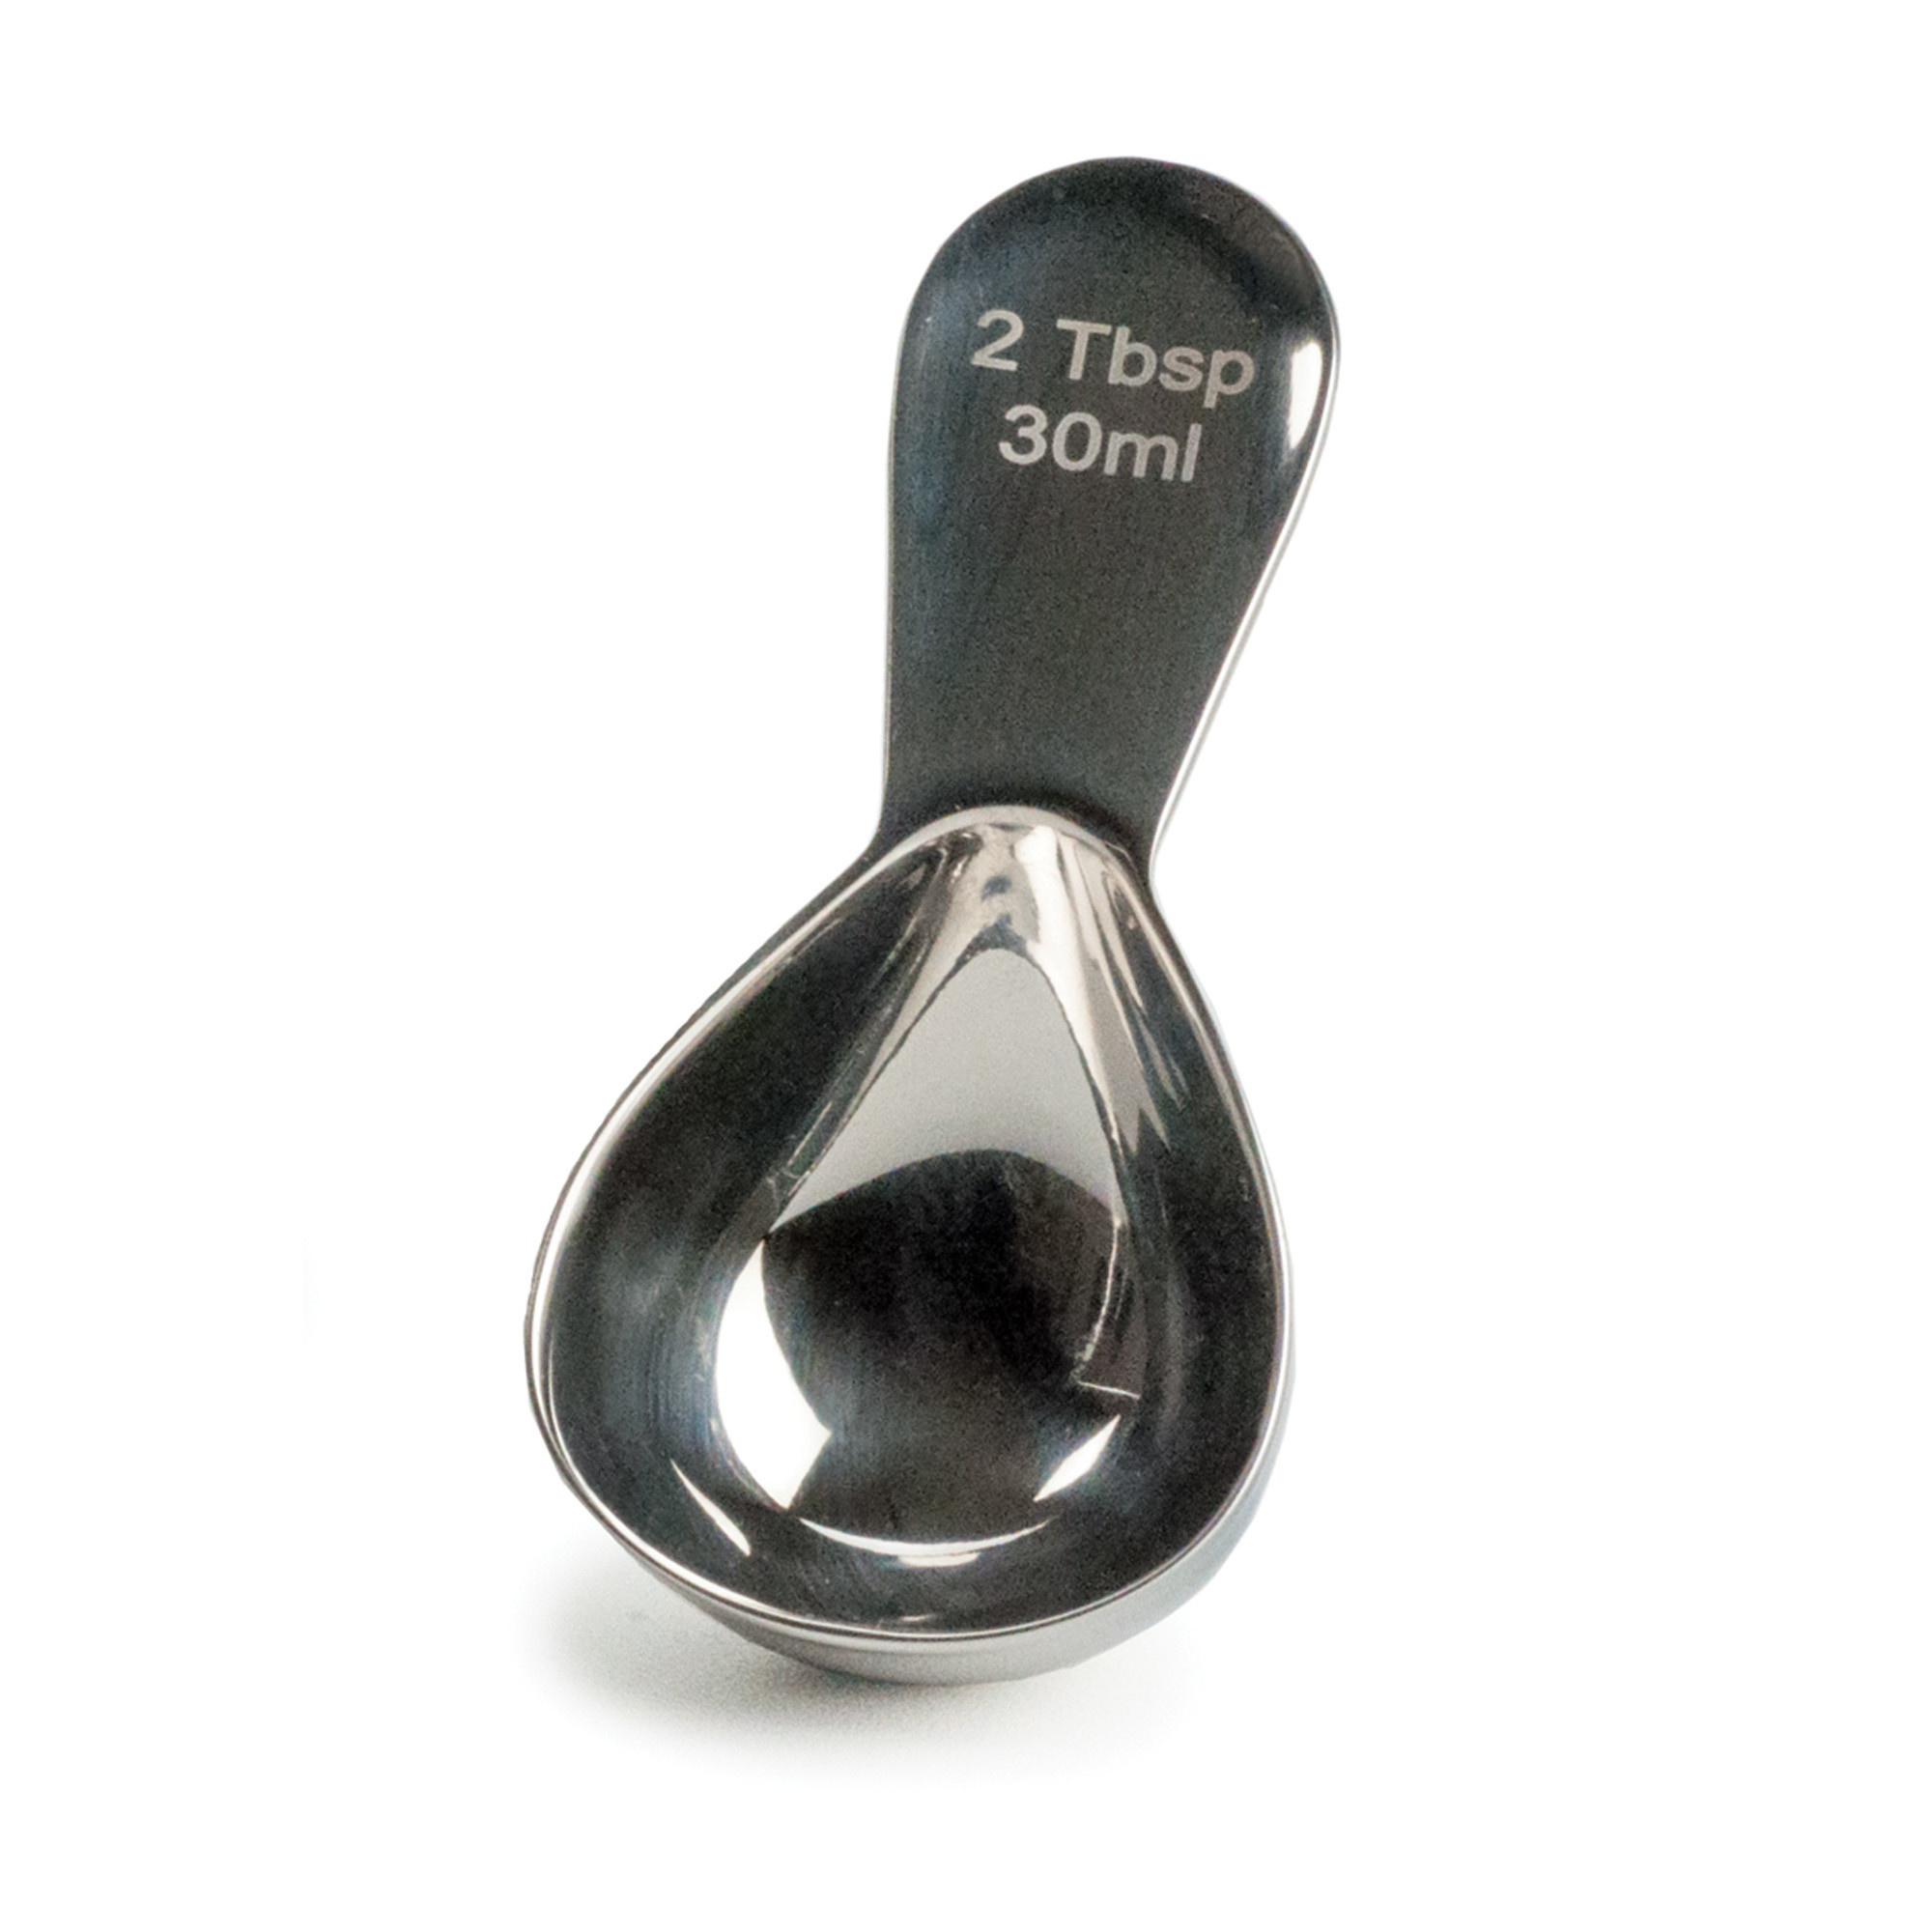  RSVP Endurance Stainless Steel Tablespoon Measuring